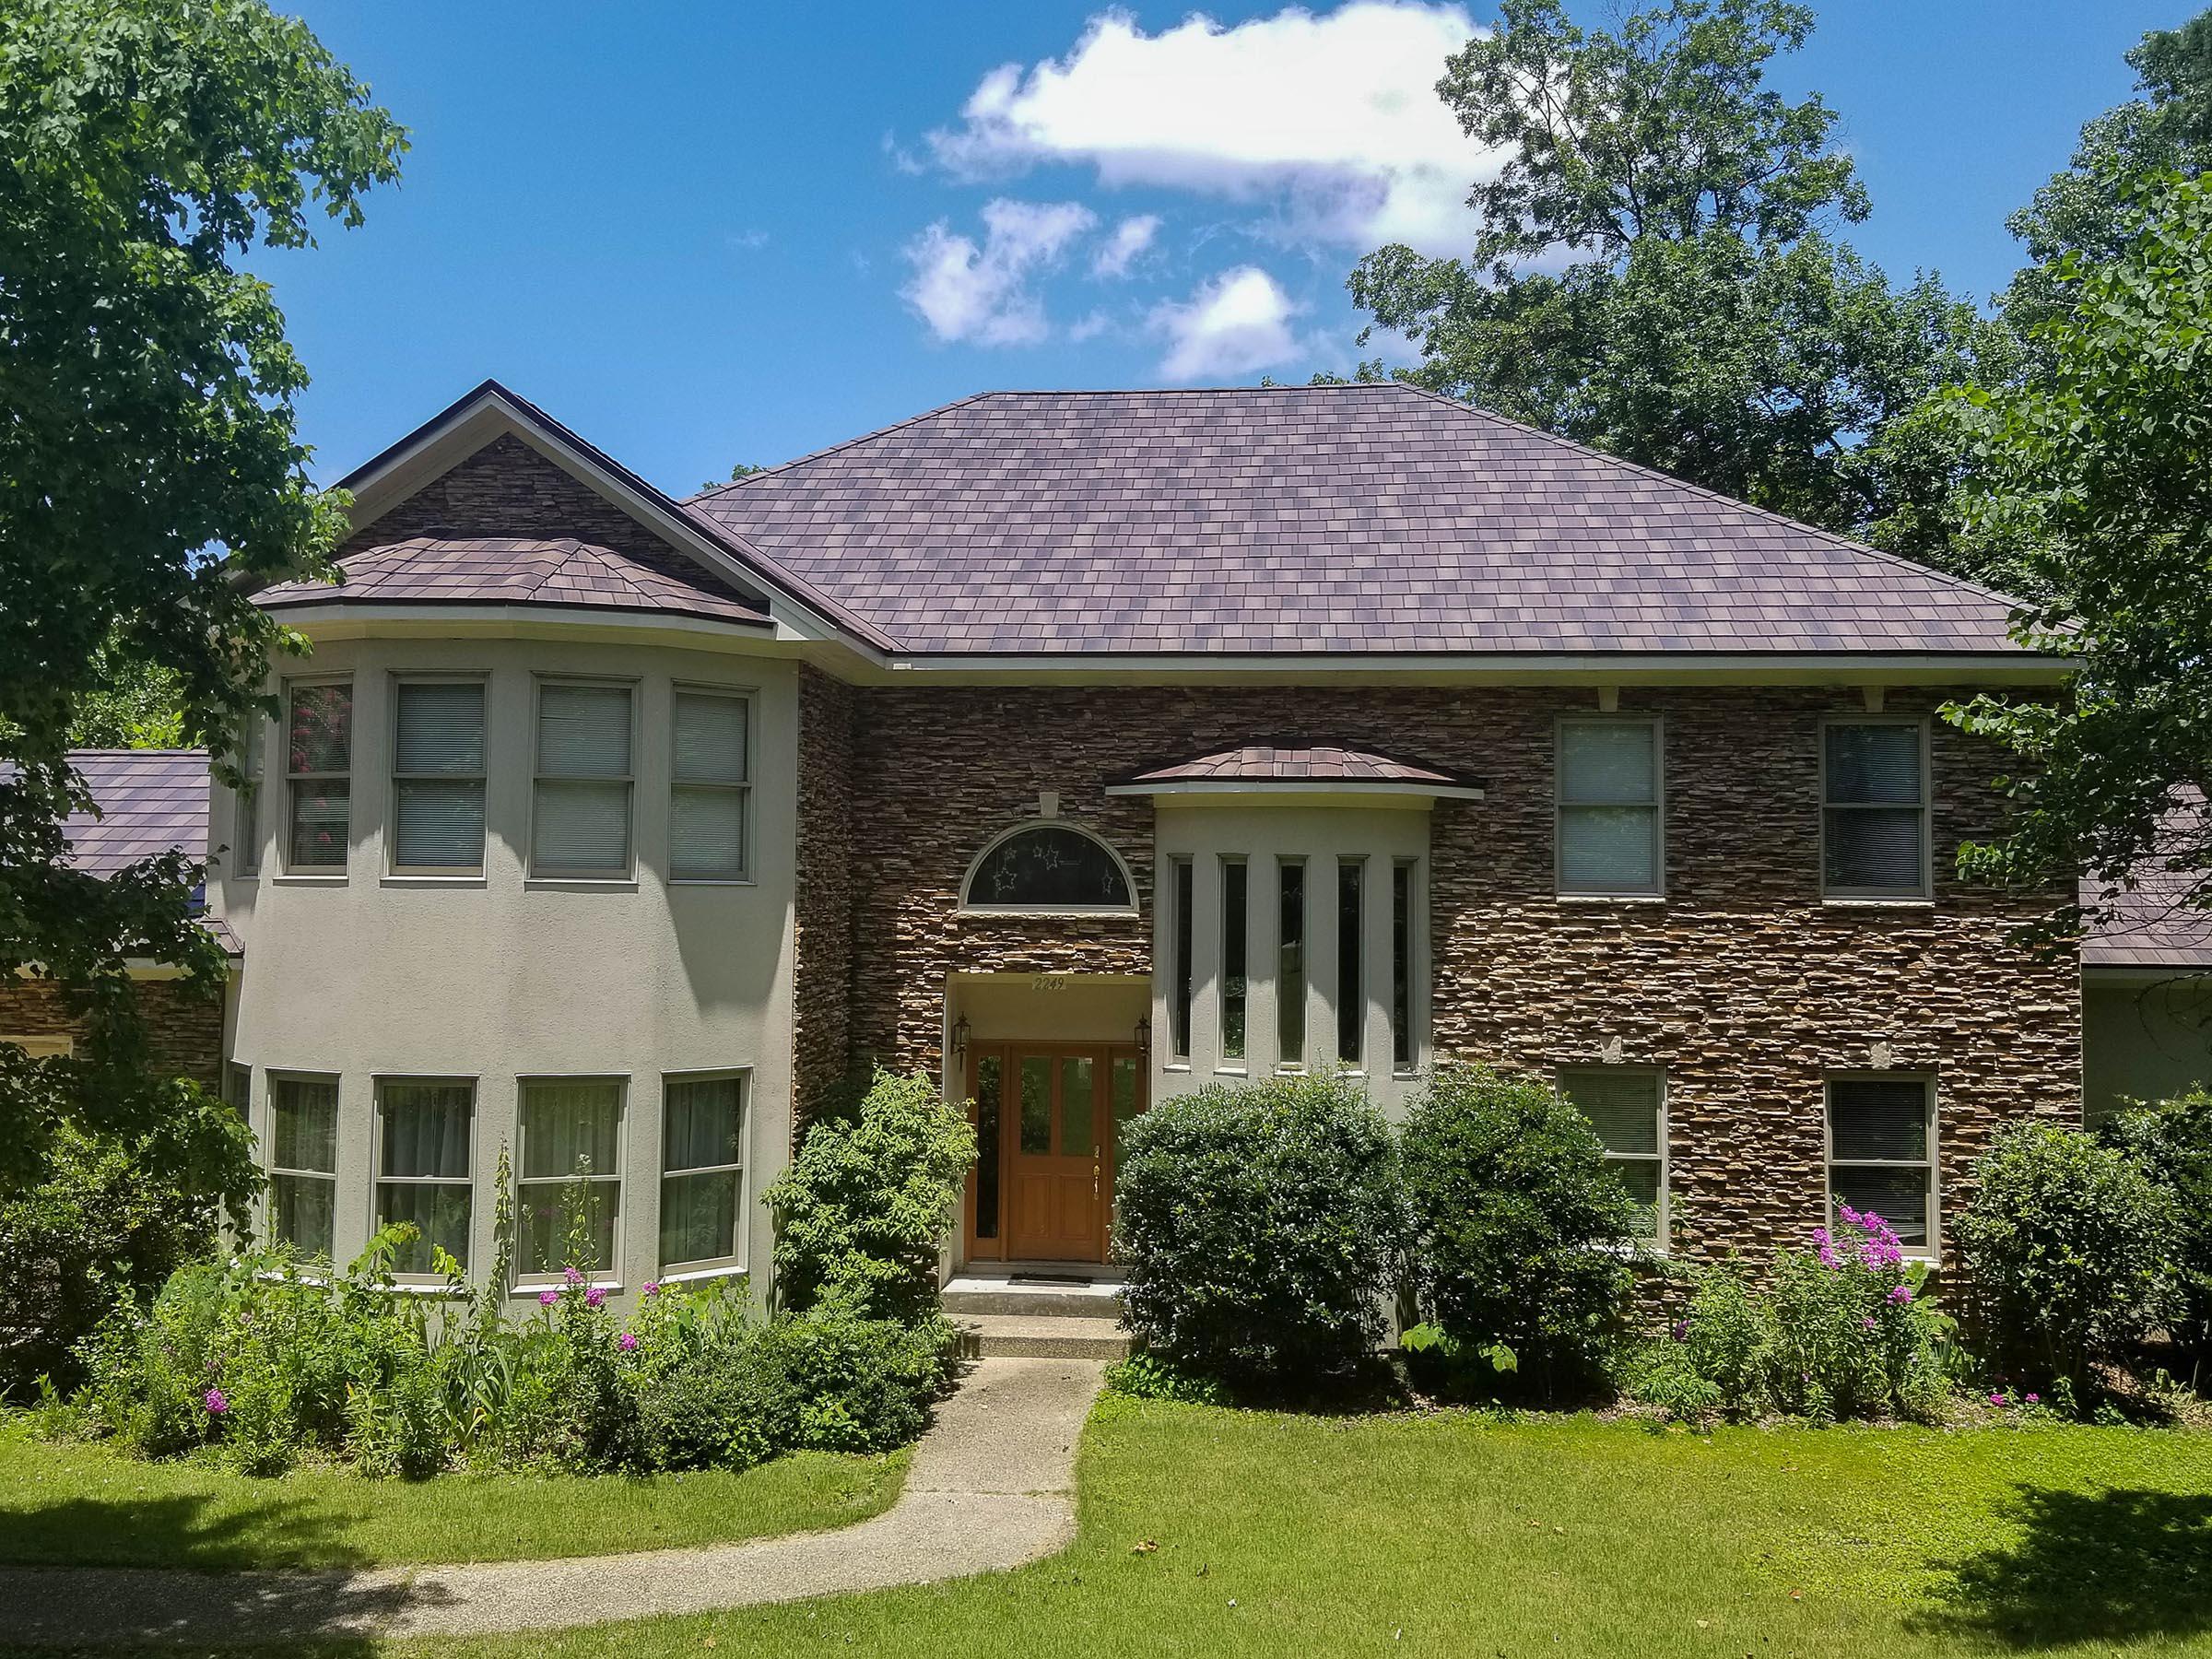 EDCO's Arrowline Shake Roofing in Royal Brown Enhanced was selected by the homeowners because of its lifetime warranty and fade protection.